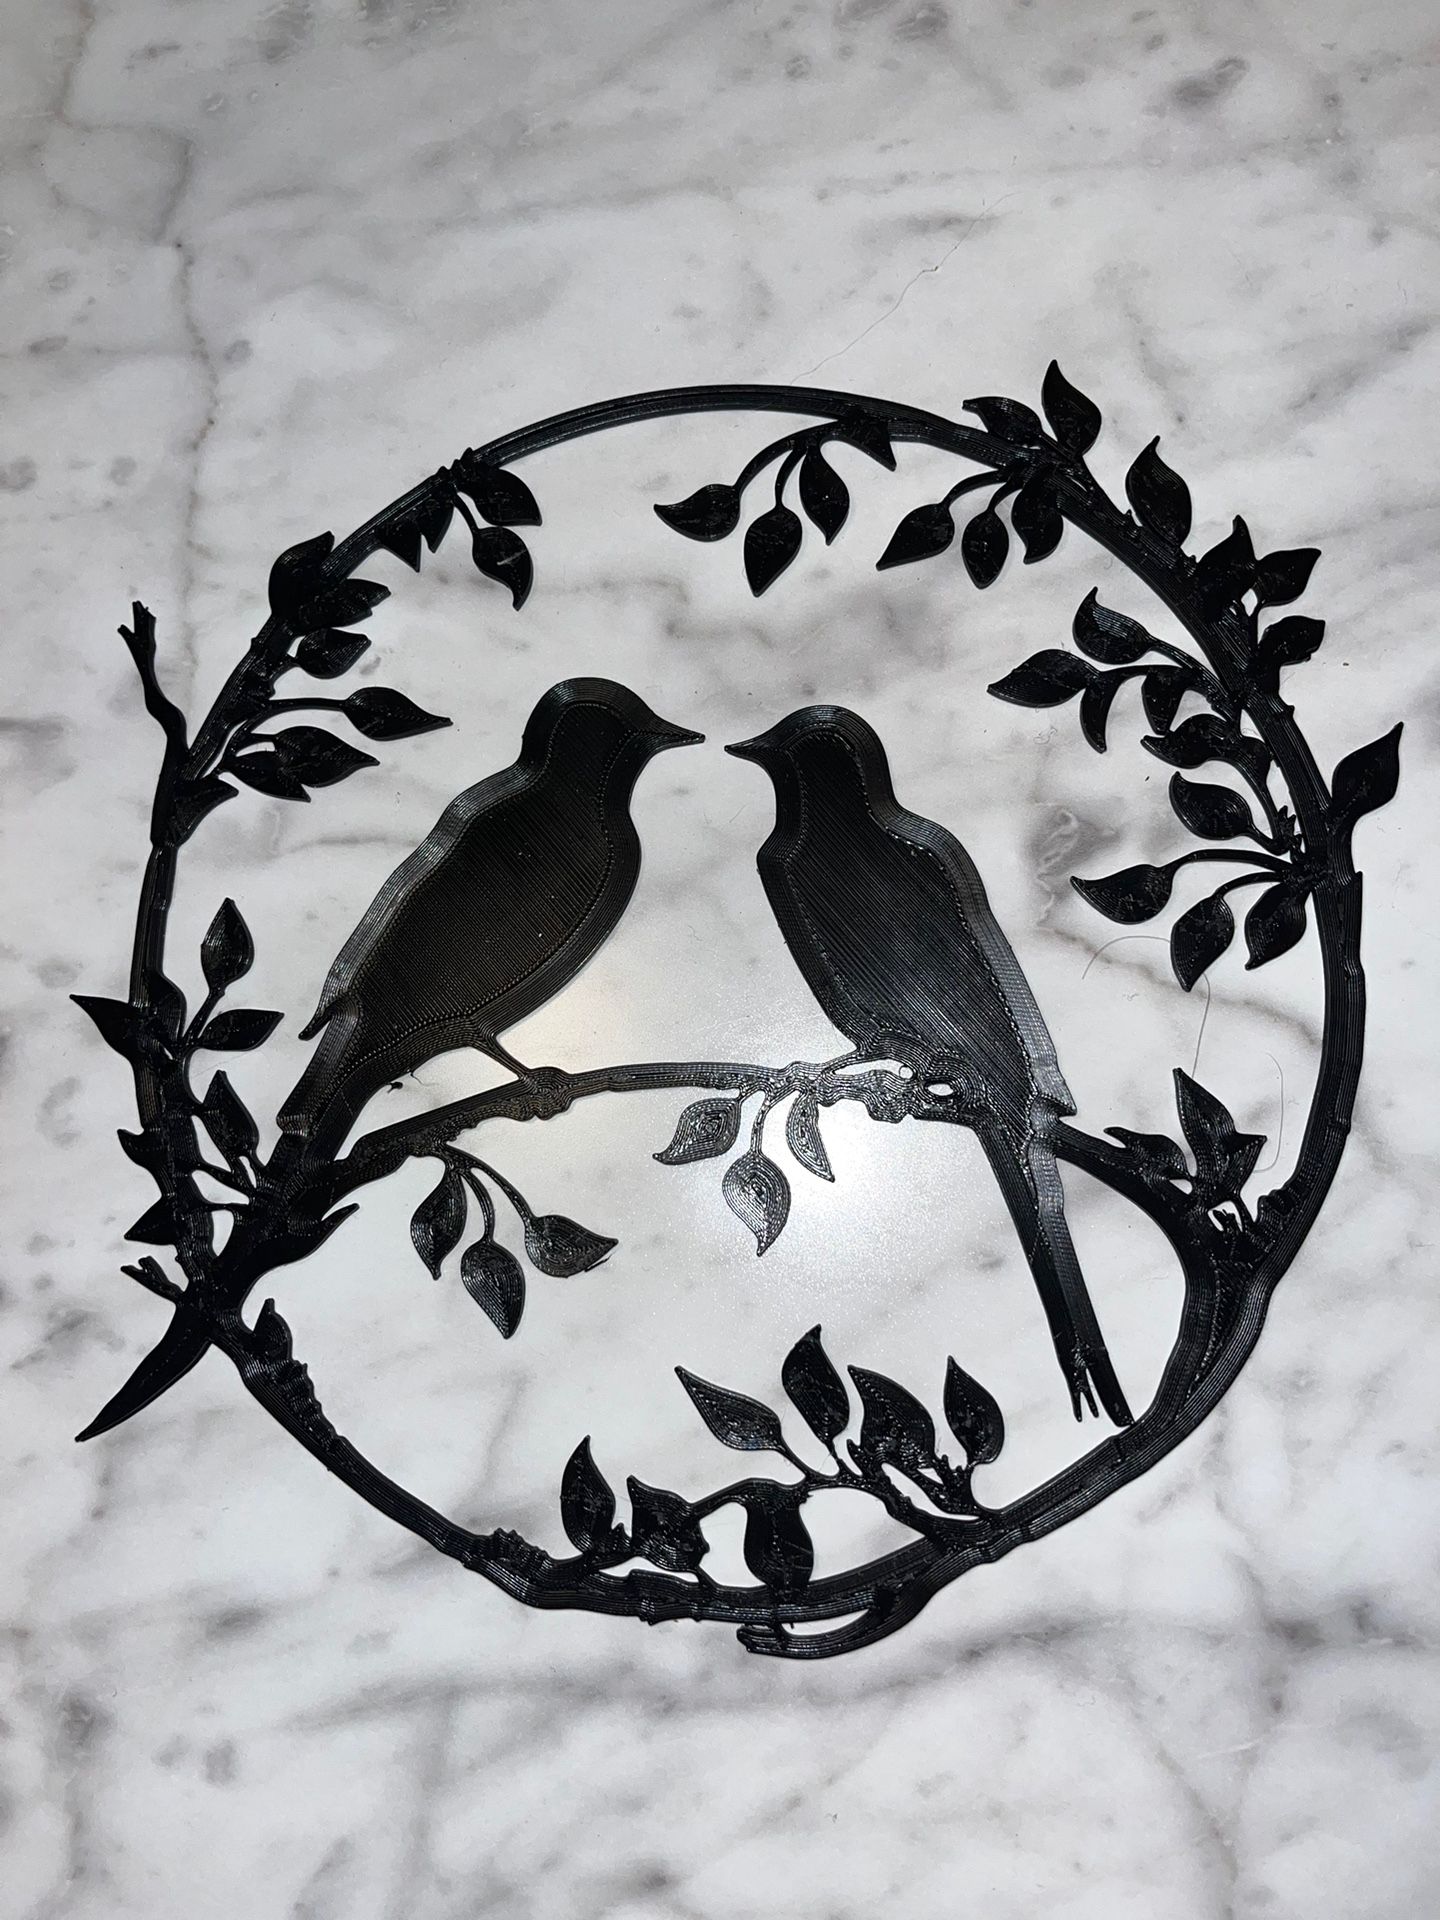 ALL NEW Unique Black Love Birds Hanging Wall Art Home or office decorations